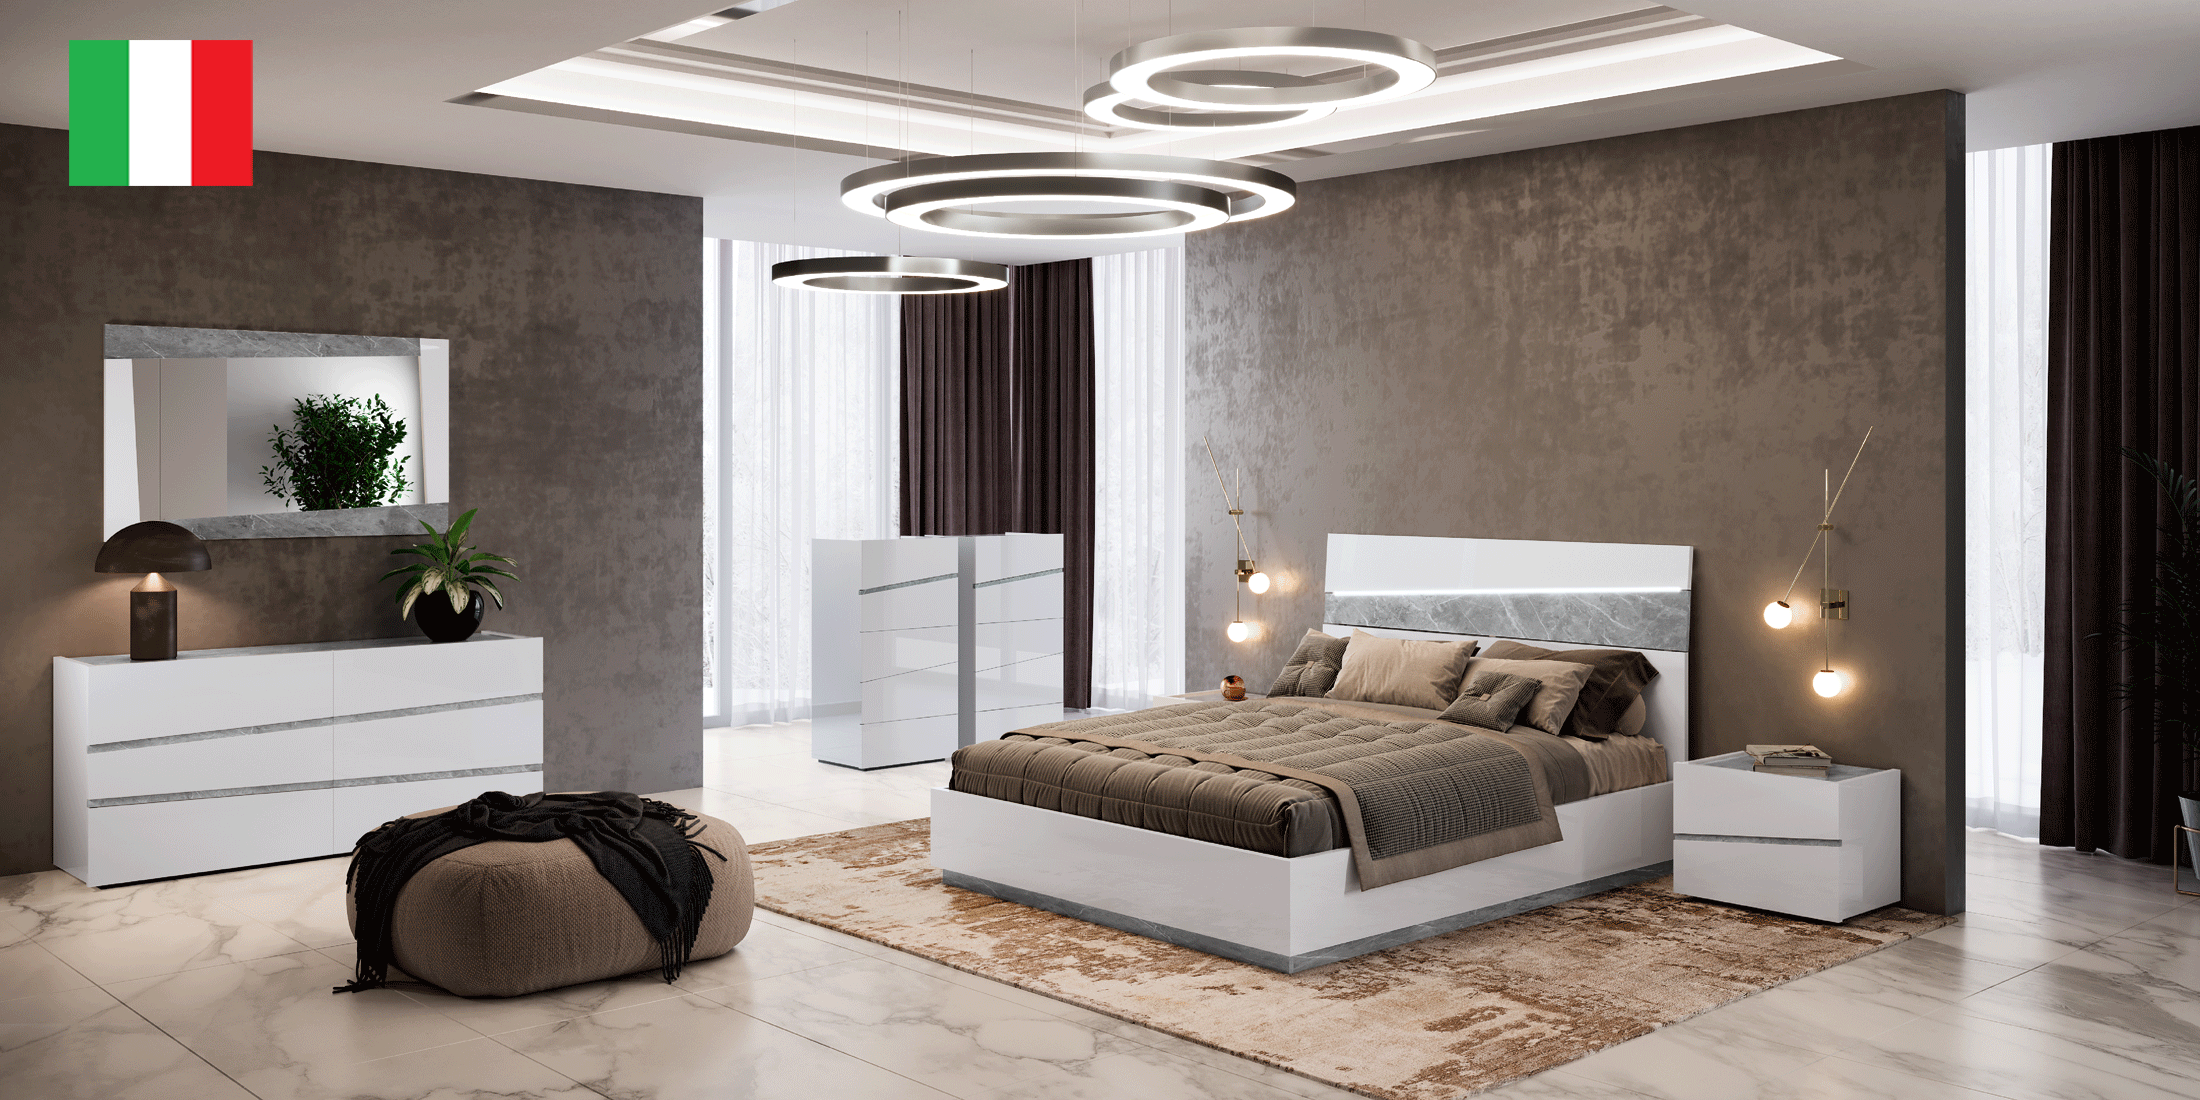 Brands Arredoclassic Bedroom, Italy Alba Bedroom w/ Light by Camelgroup – Italy